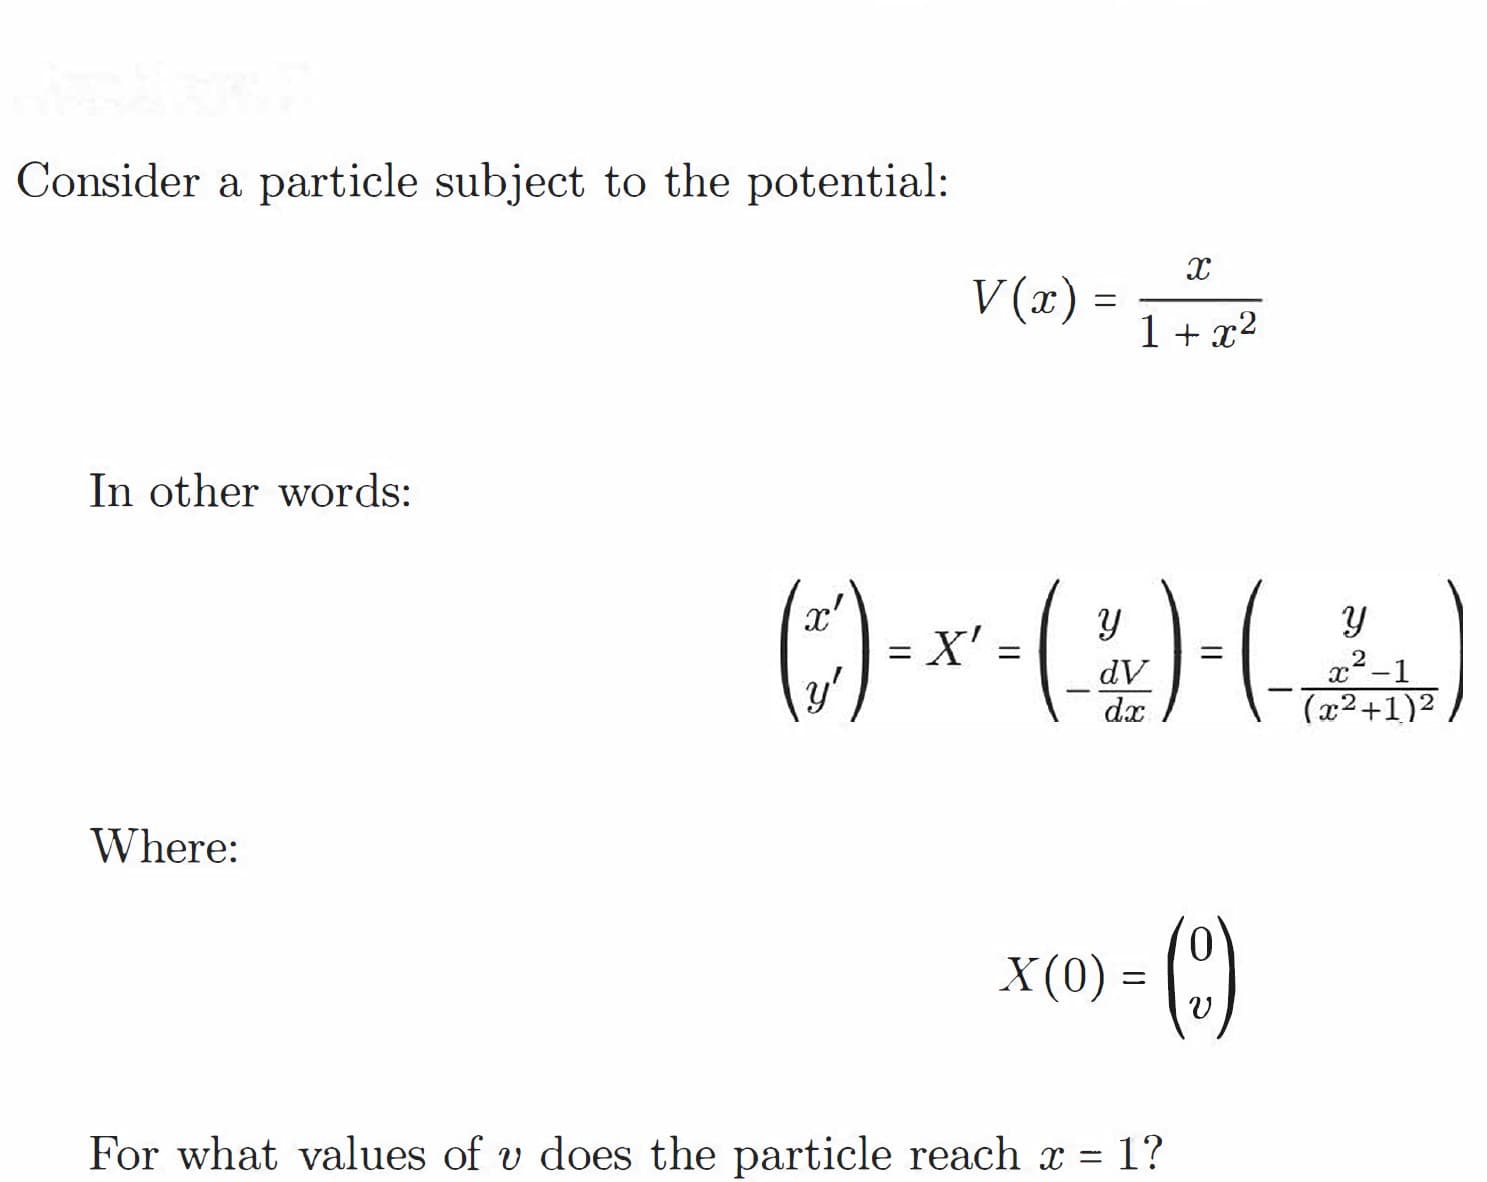 Consider a particle subject to the potential:
V (x) :
1 + x²
In other words:
x'
X' =
y'
dV
dx
x² -1
(x²+1)²
Where:
X(0) = C)
()-
For what values of v does the particle reach x = 1?
